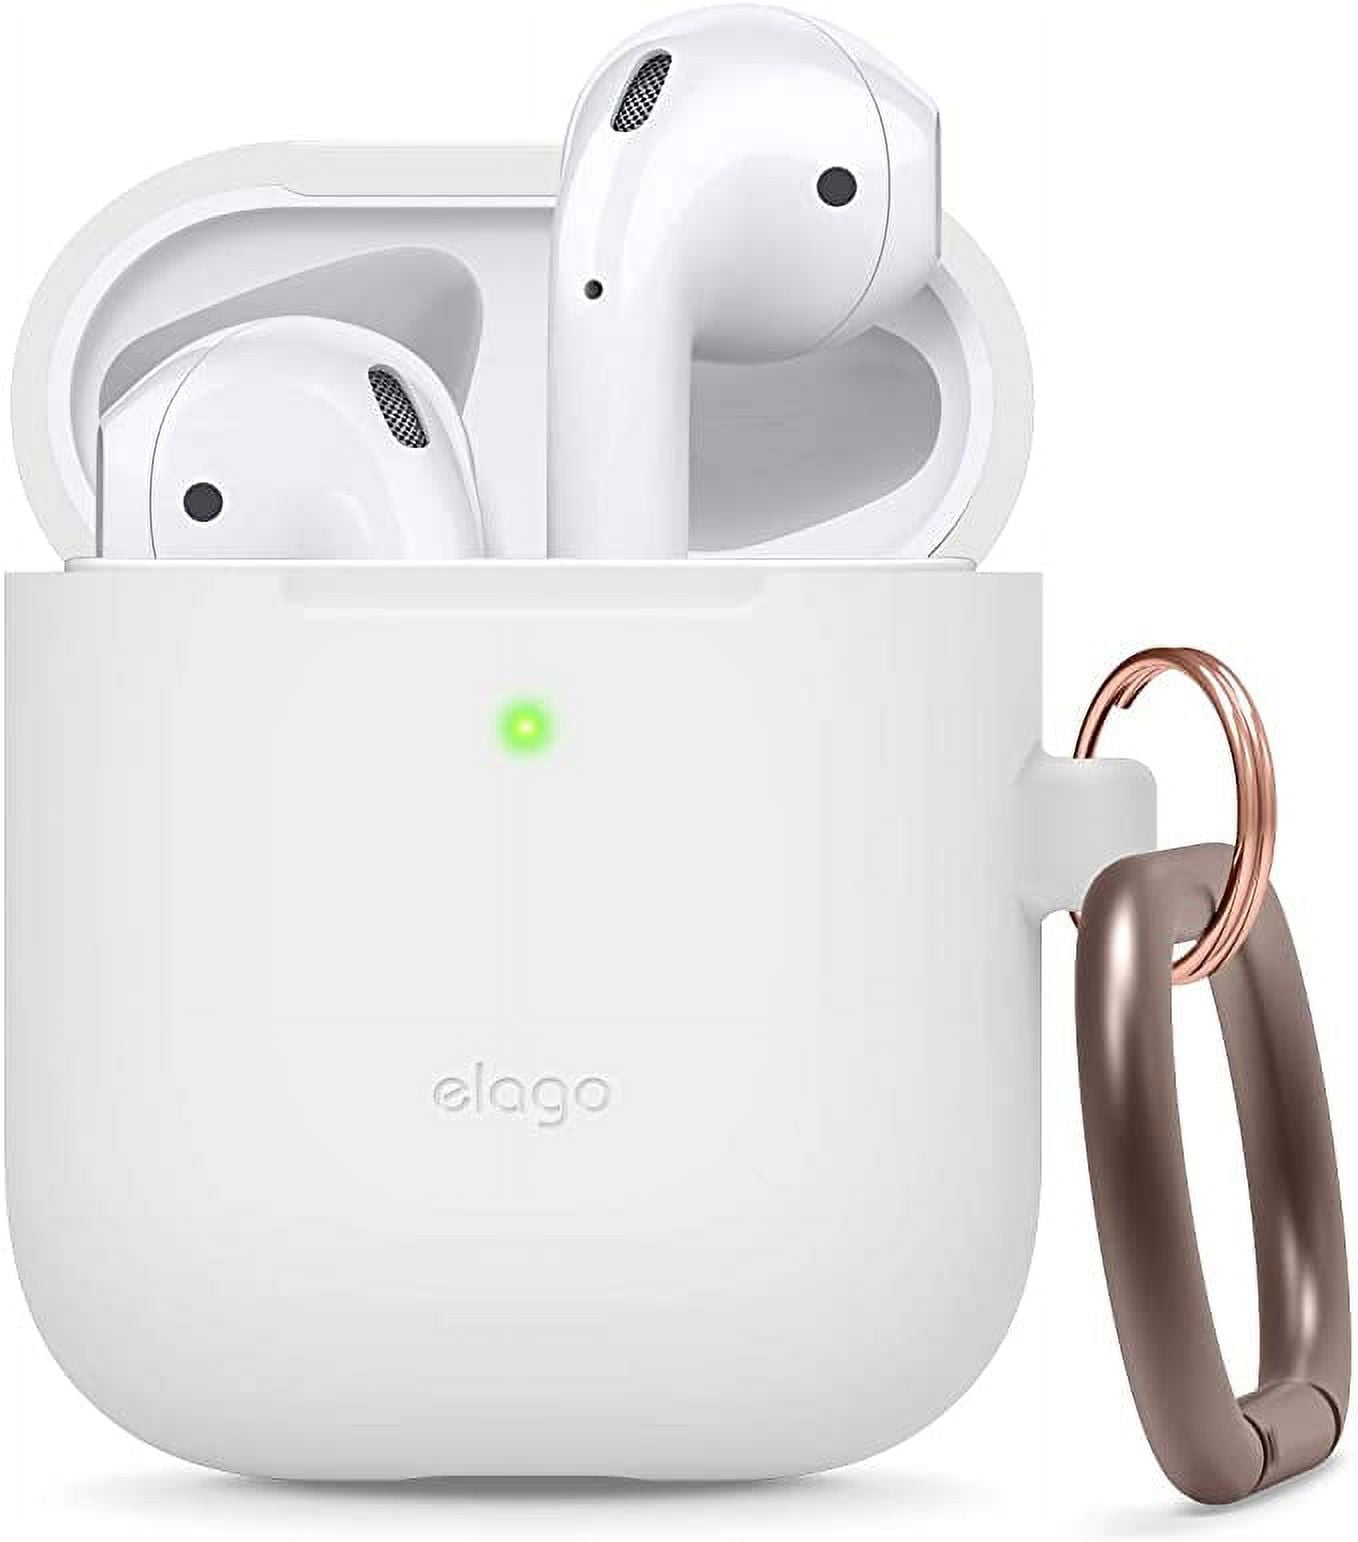 elago AirPods 1 & 2 Earbuds Cover with a Pouch [3 Colors]